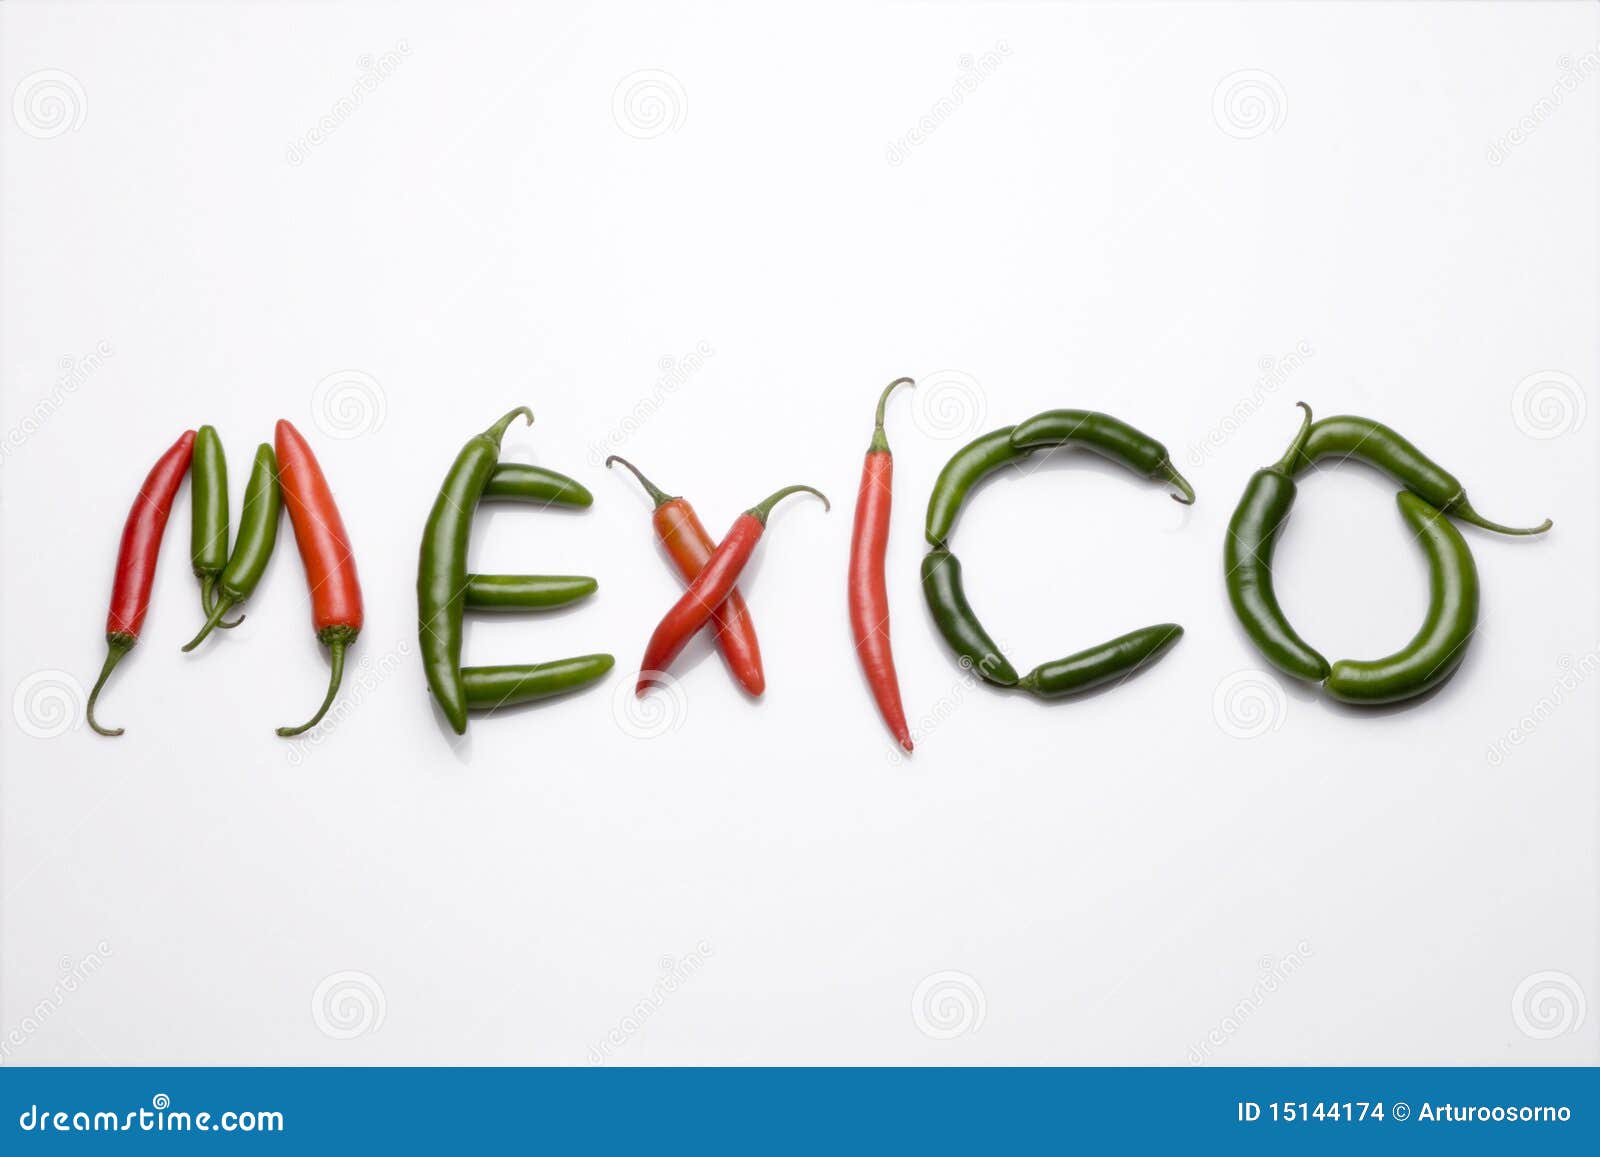 chiles from mexico